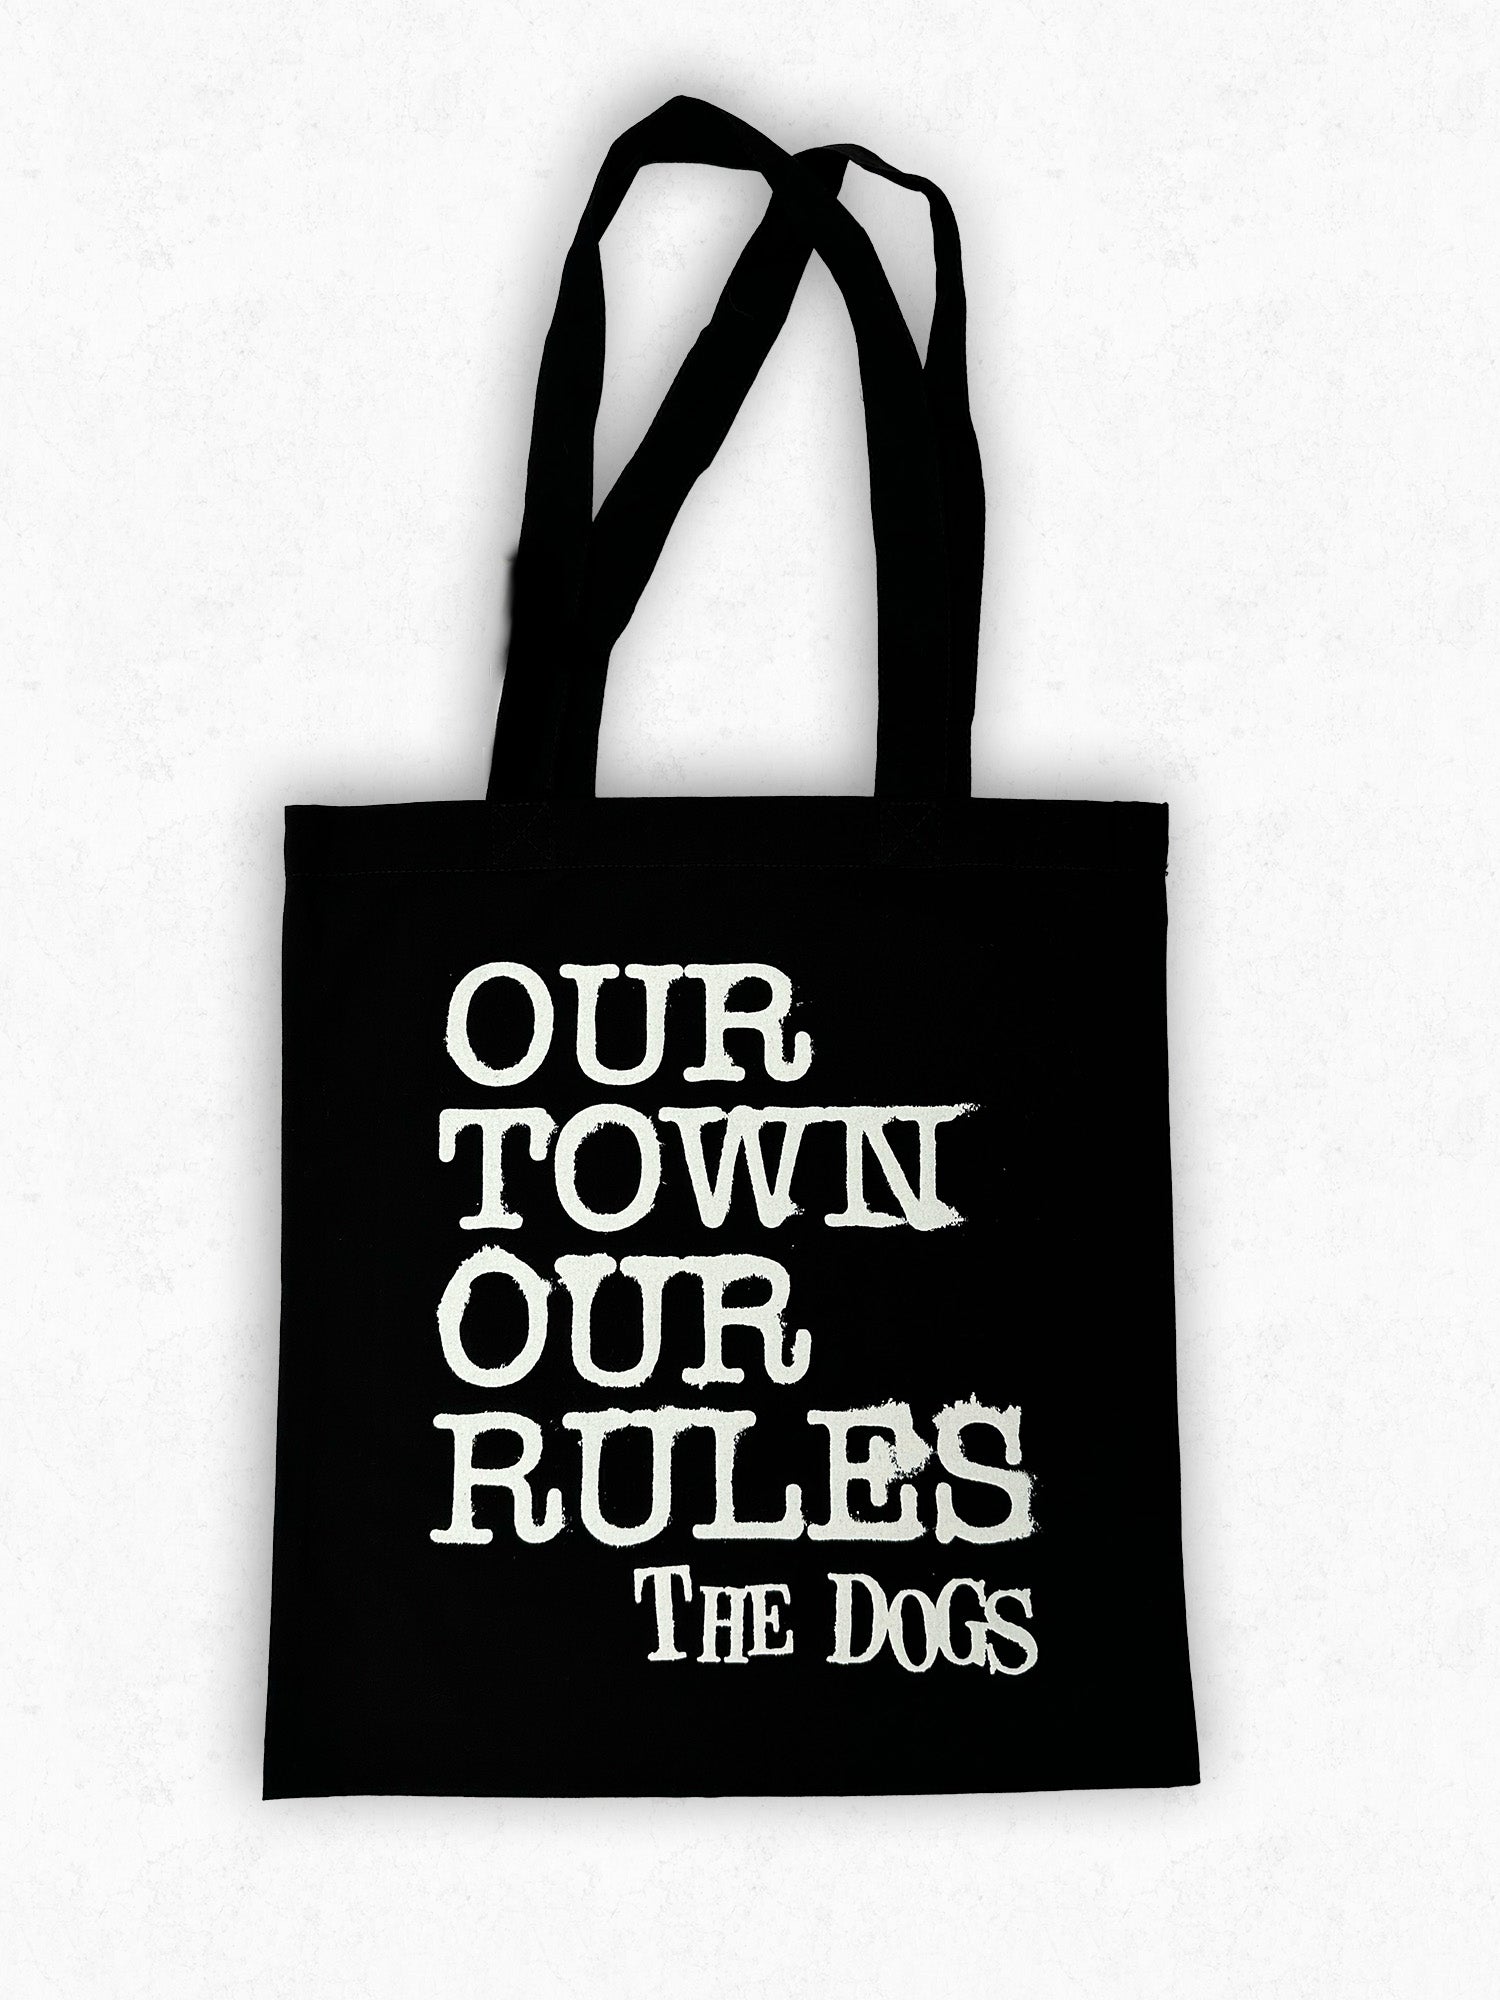 The Dogs - Tote bag